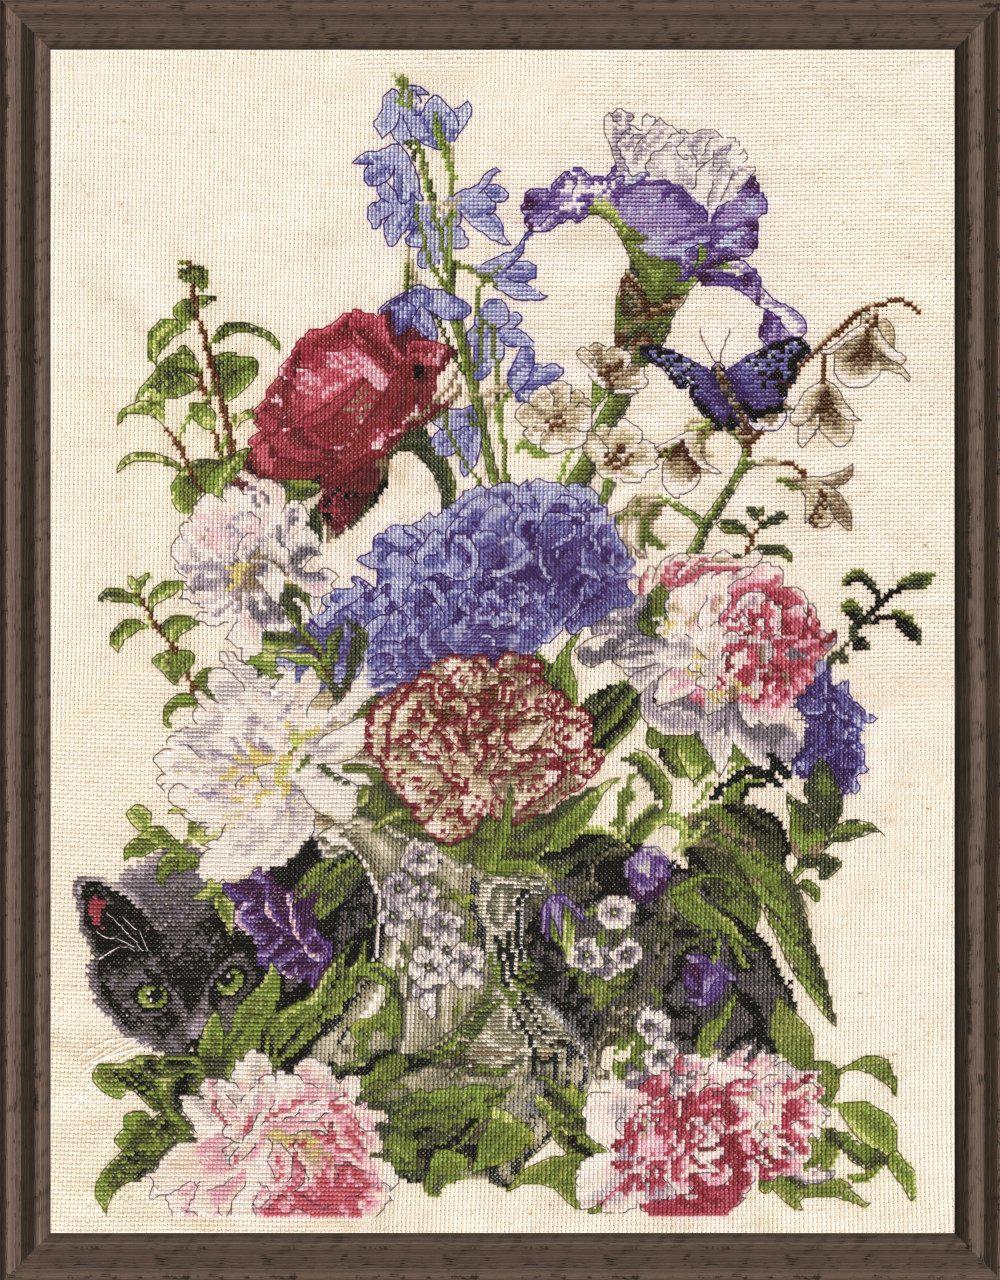 tobin 2908 14 count bouquet with cat counted cross stitch kit, 14" by 19", multicolor